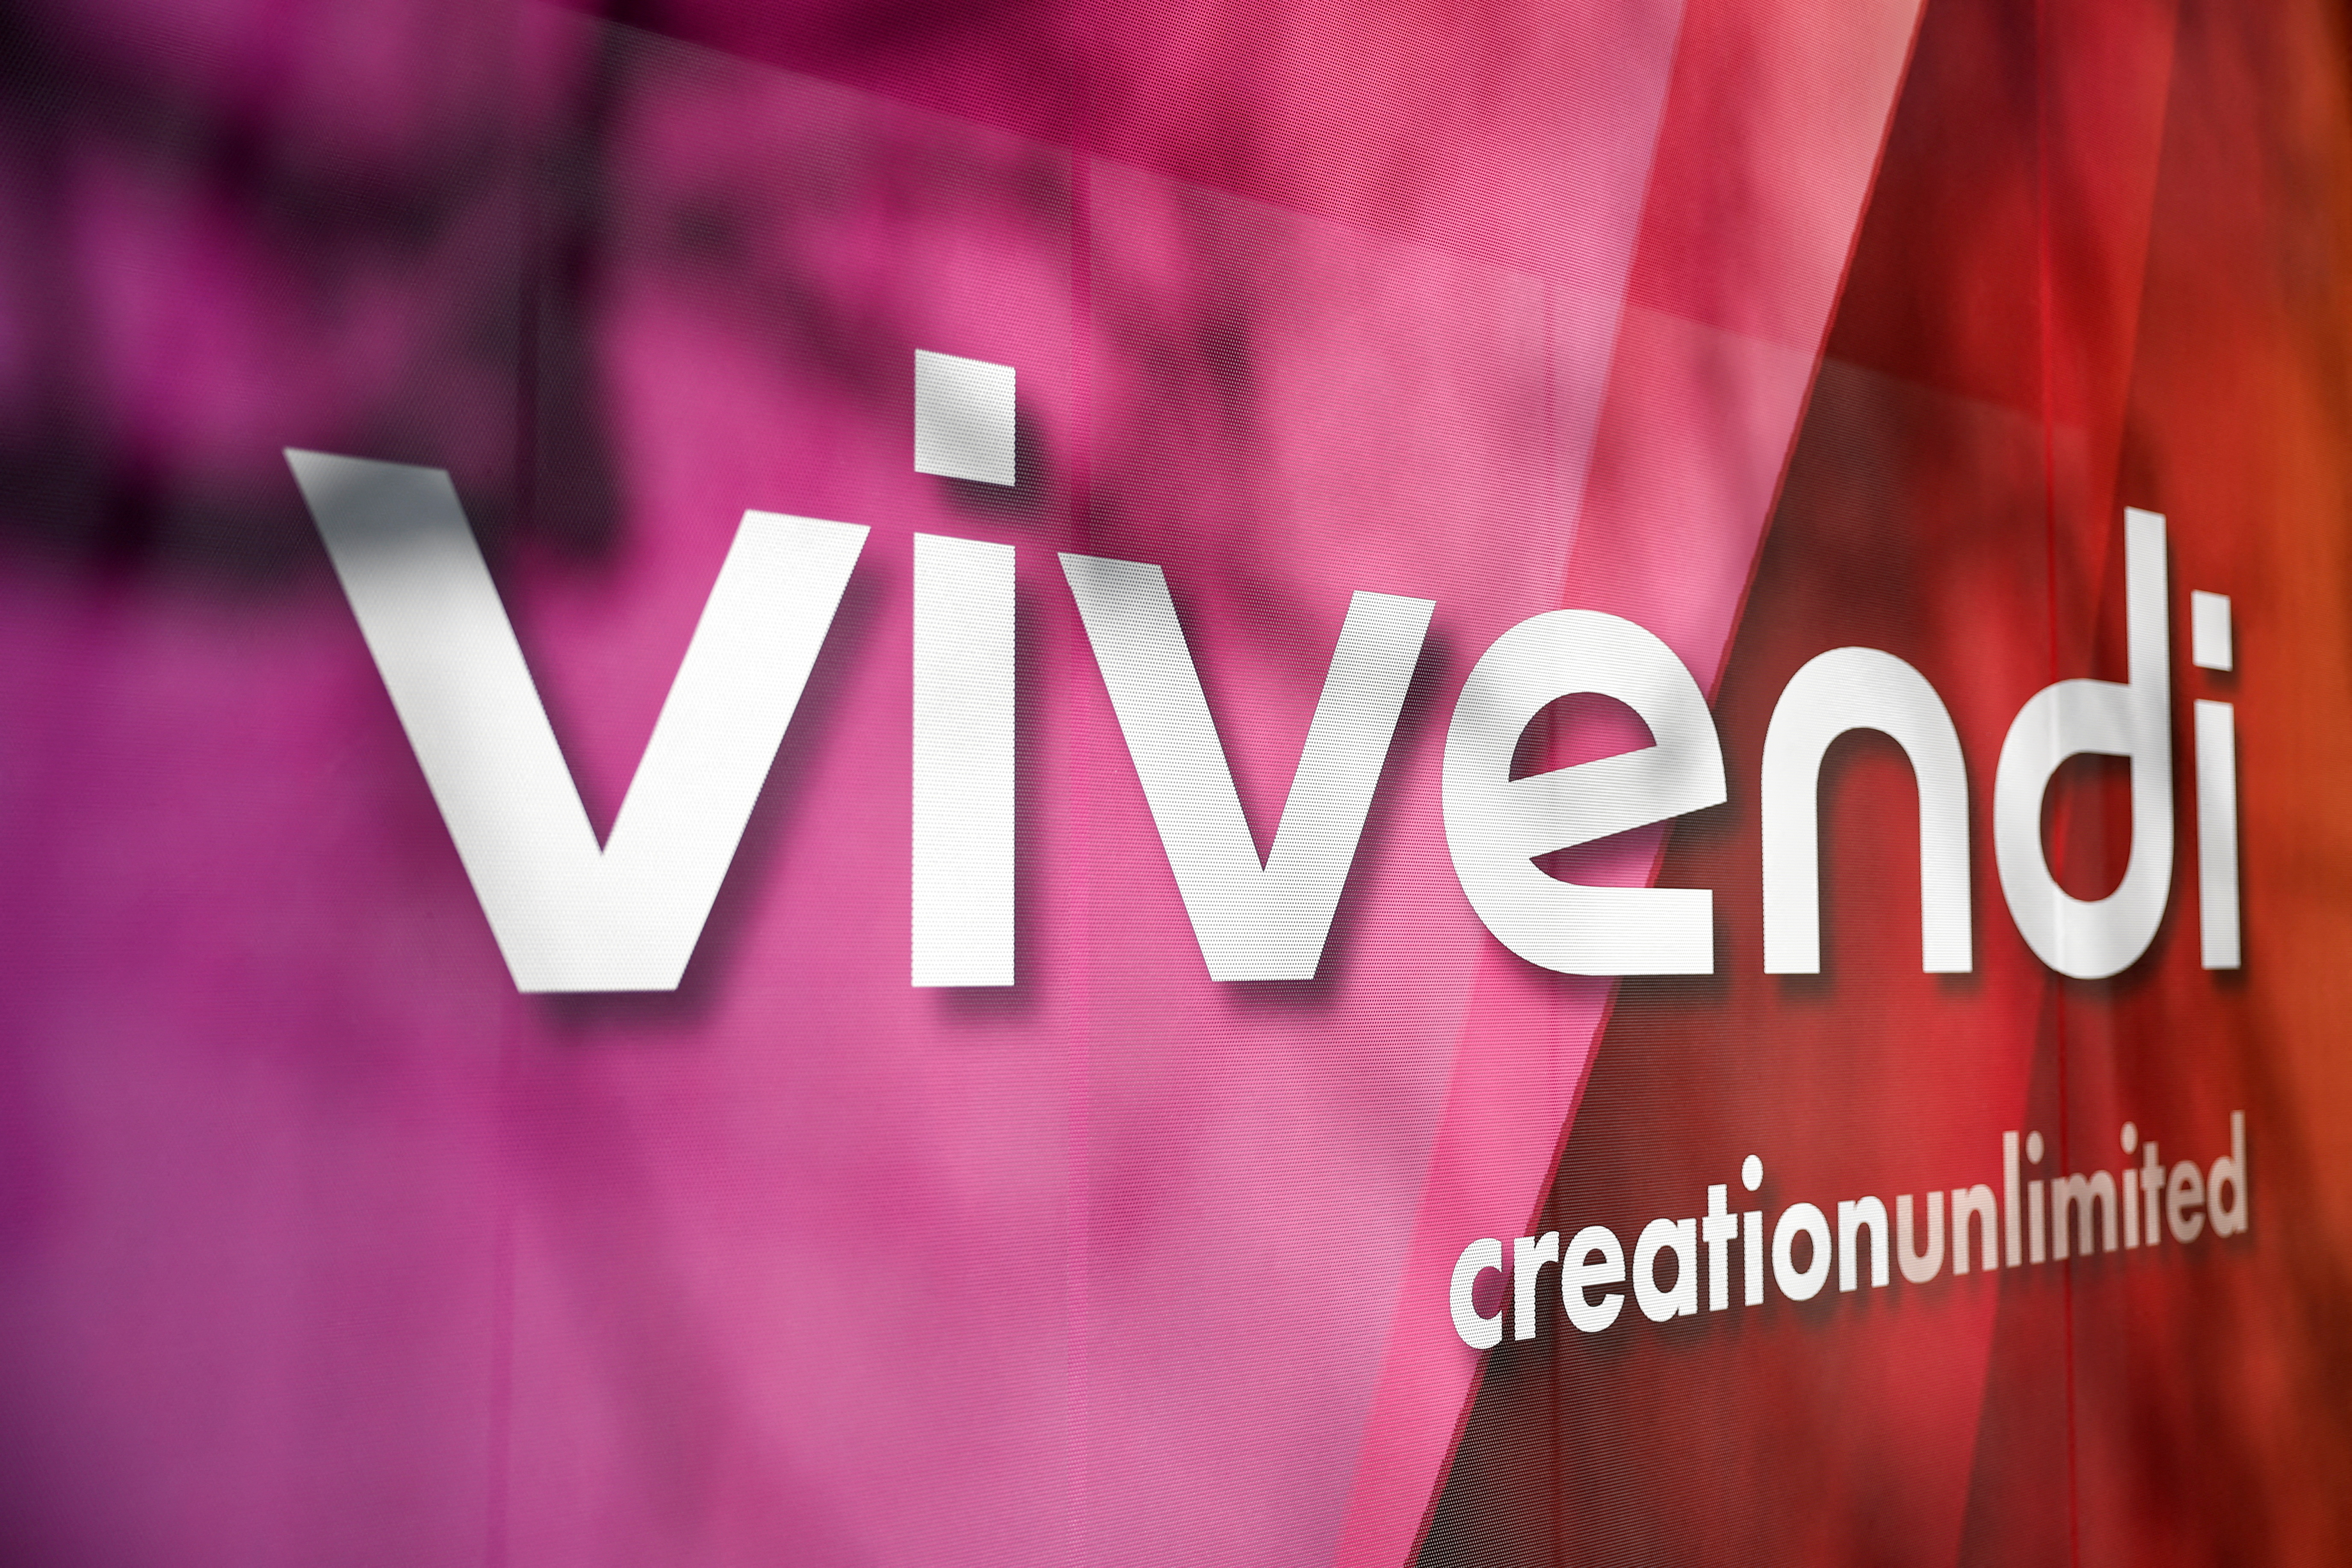 The Vivendi logo is pictured at the company's headquarters in Paris